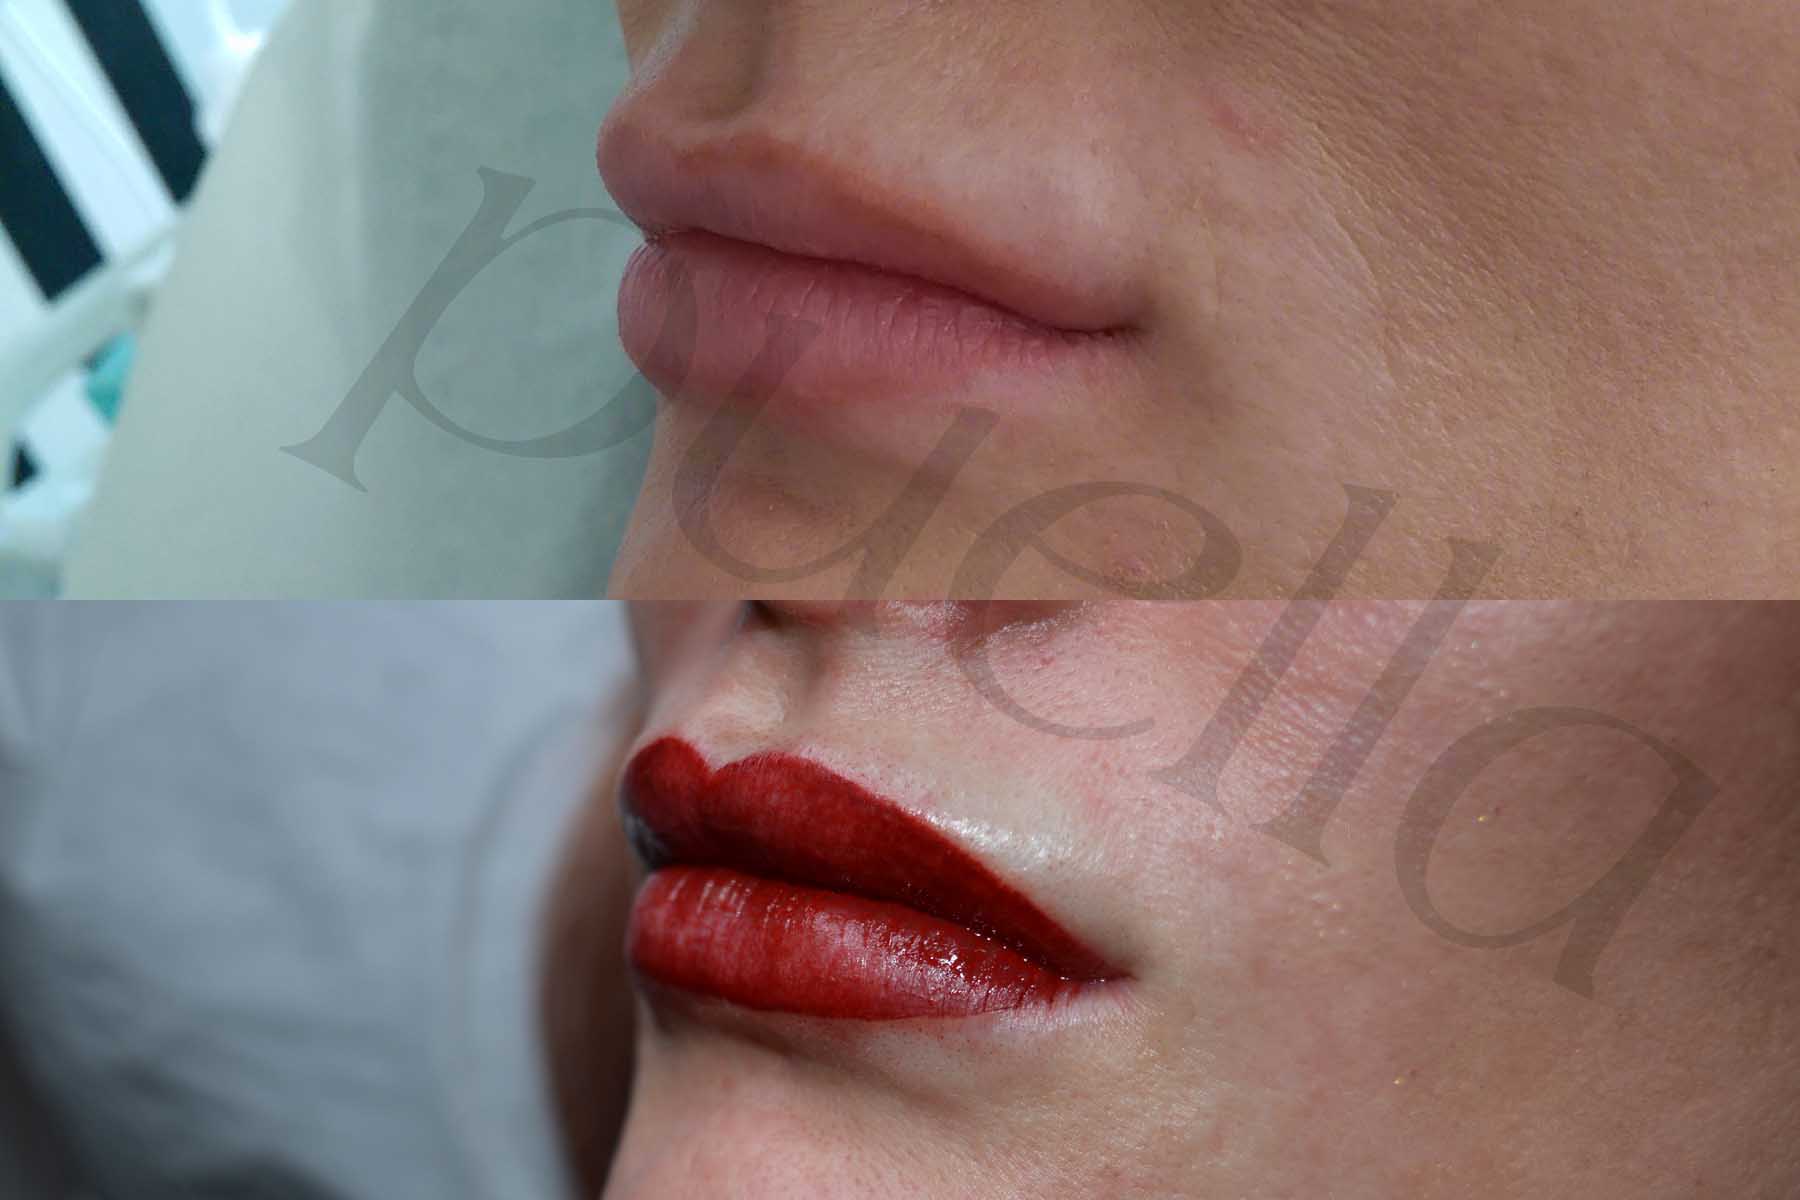 Permanent makeup by Puella Beauty - lips before and after